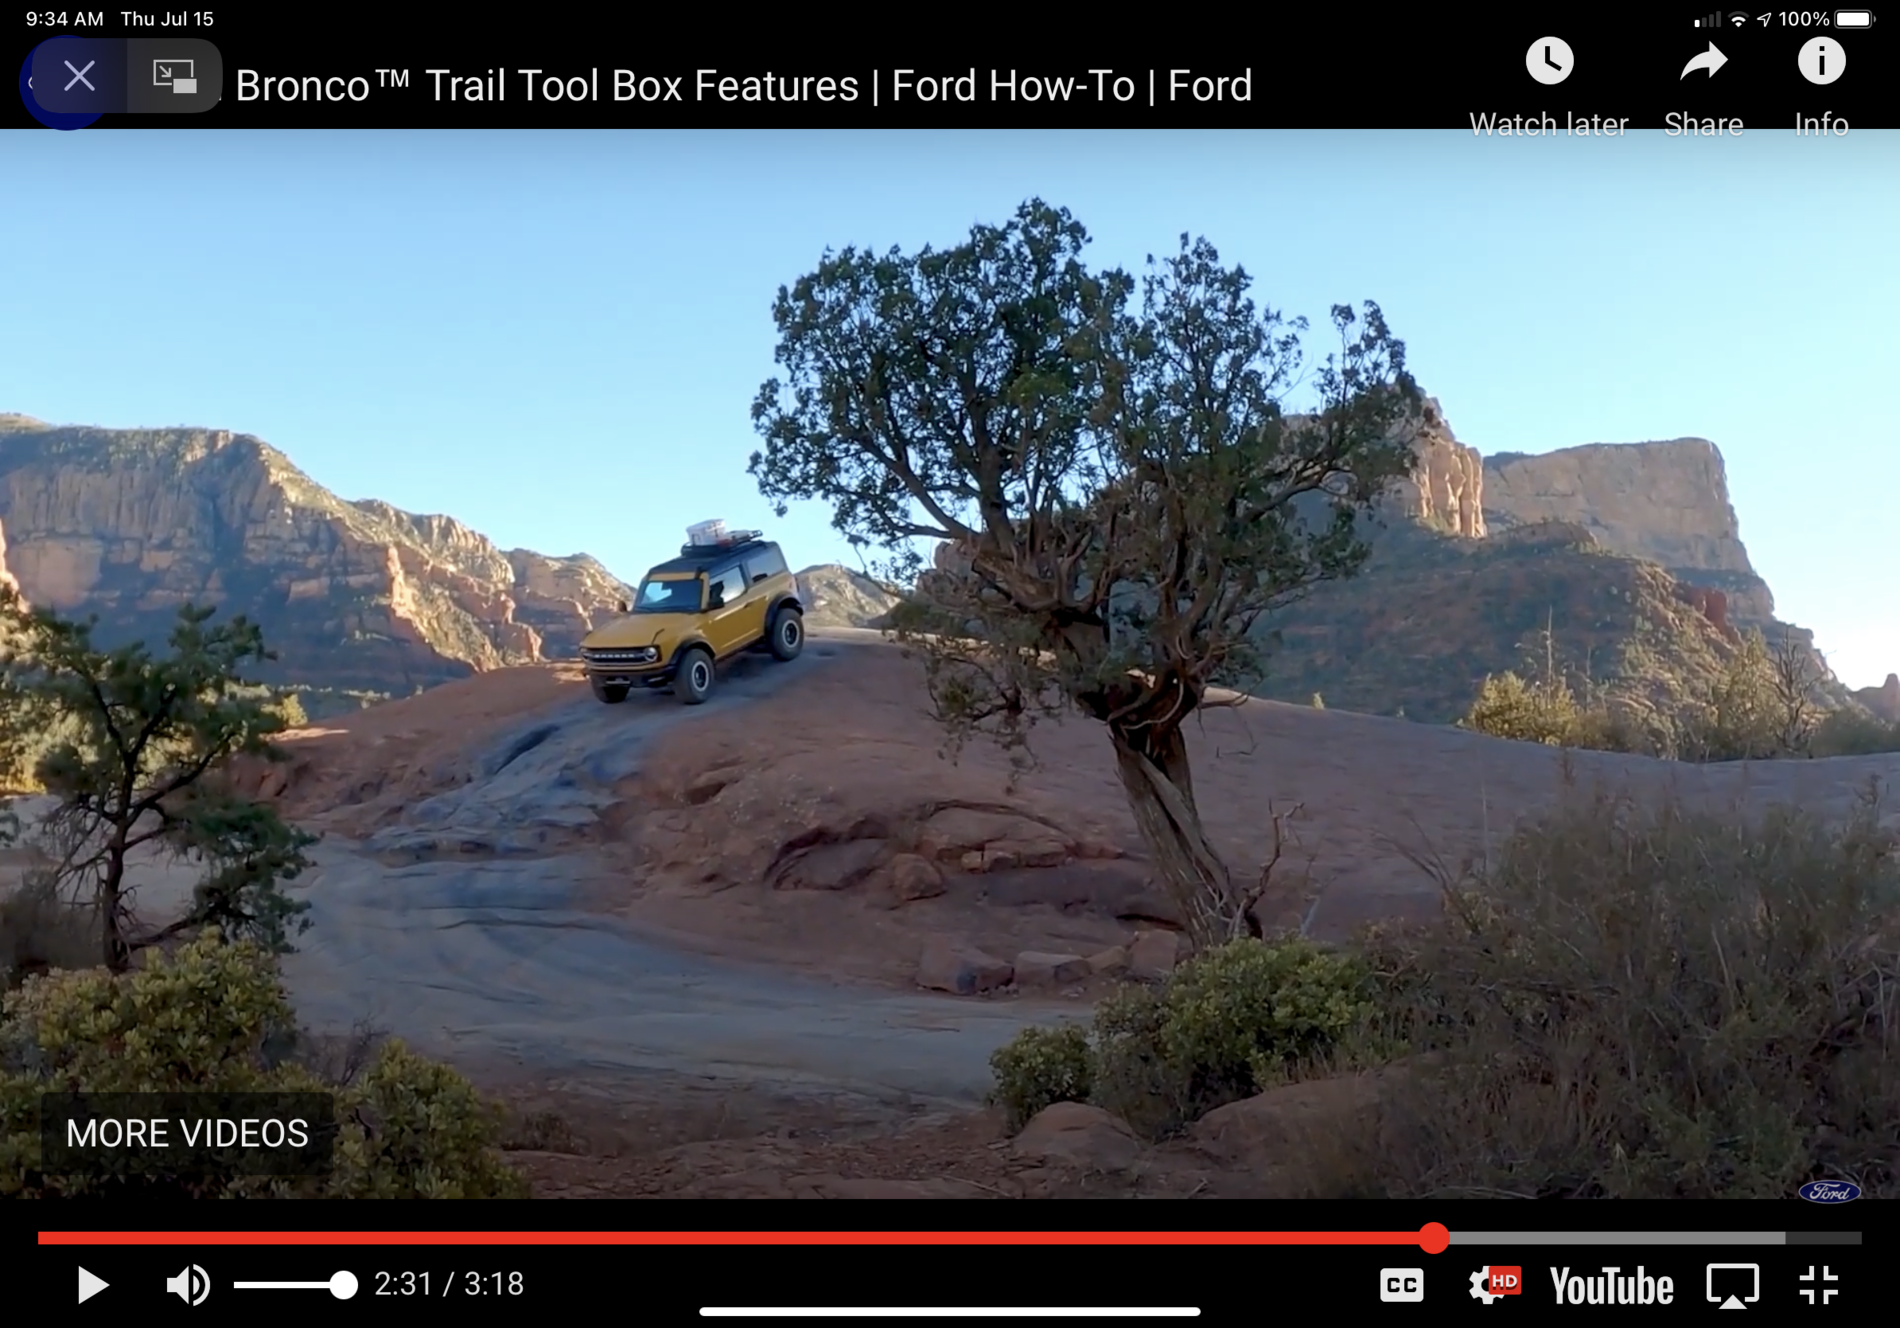 Ford Bronco Official Ford Video: Bronco Off-Road Features C7BD70E9-FF66-49BD-A957-E40697DDC260